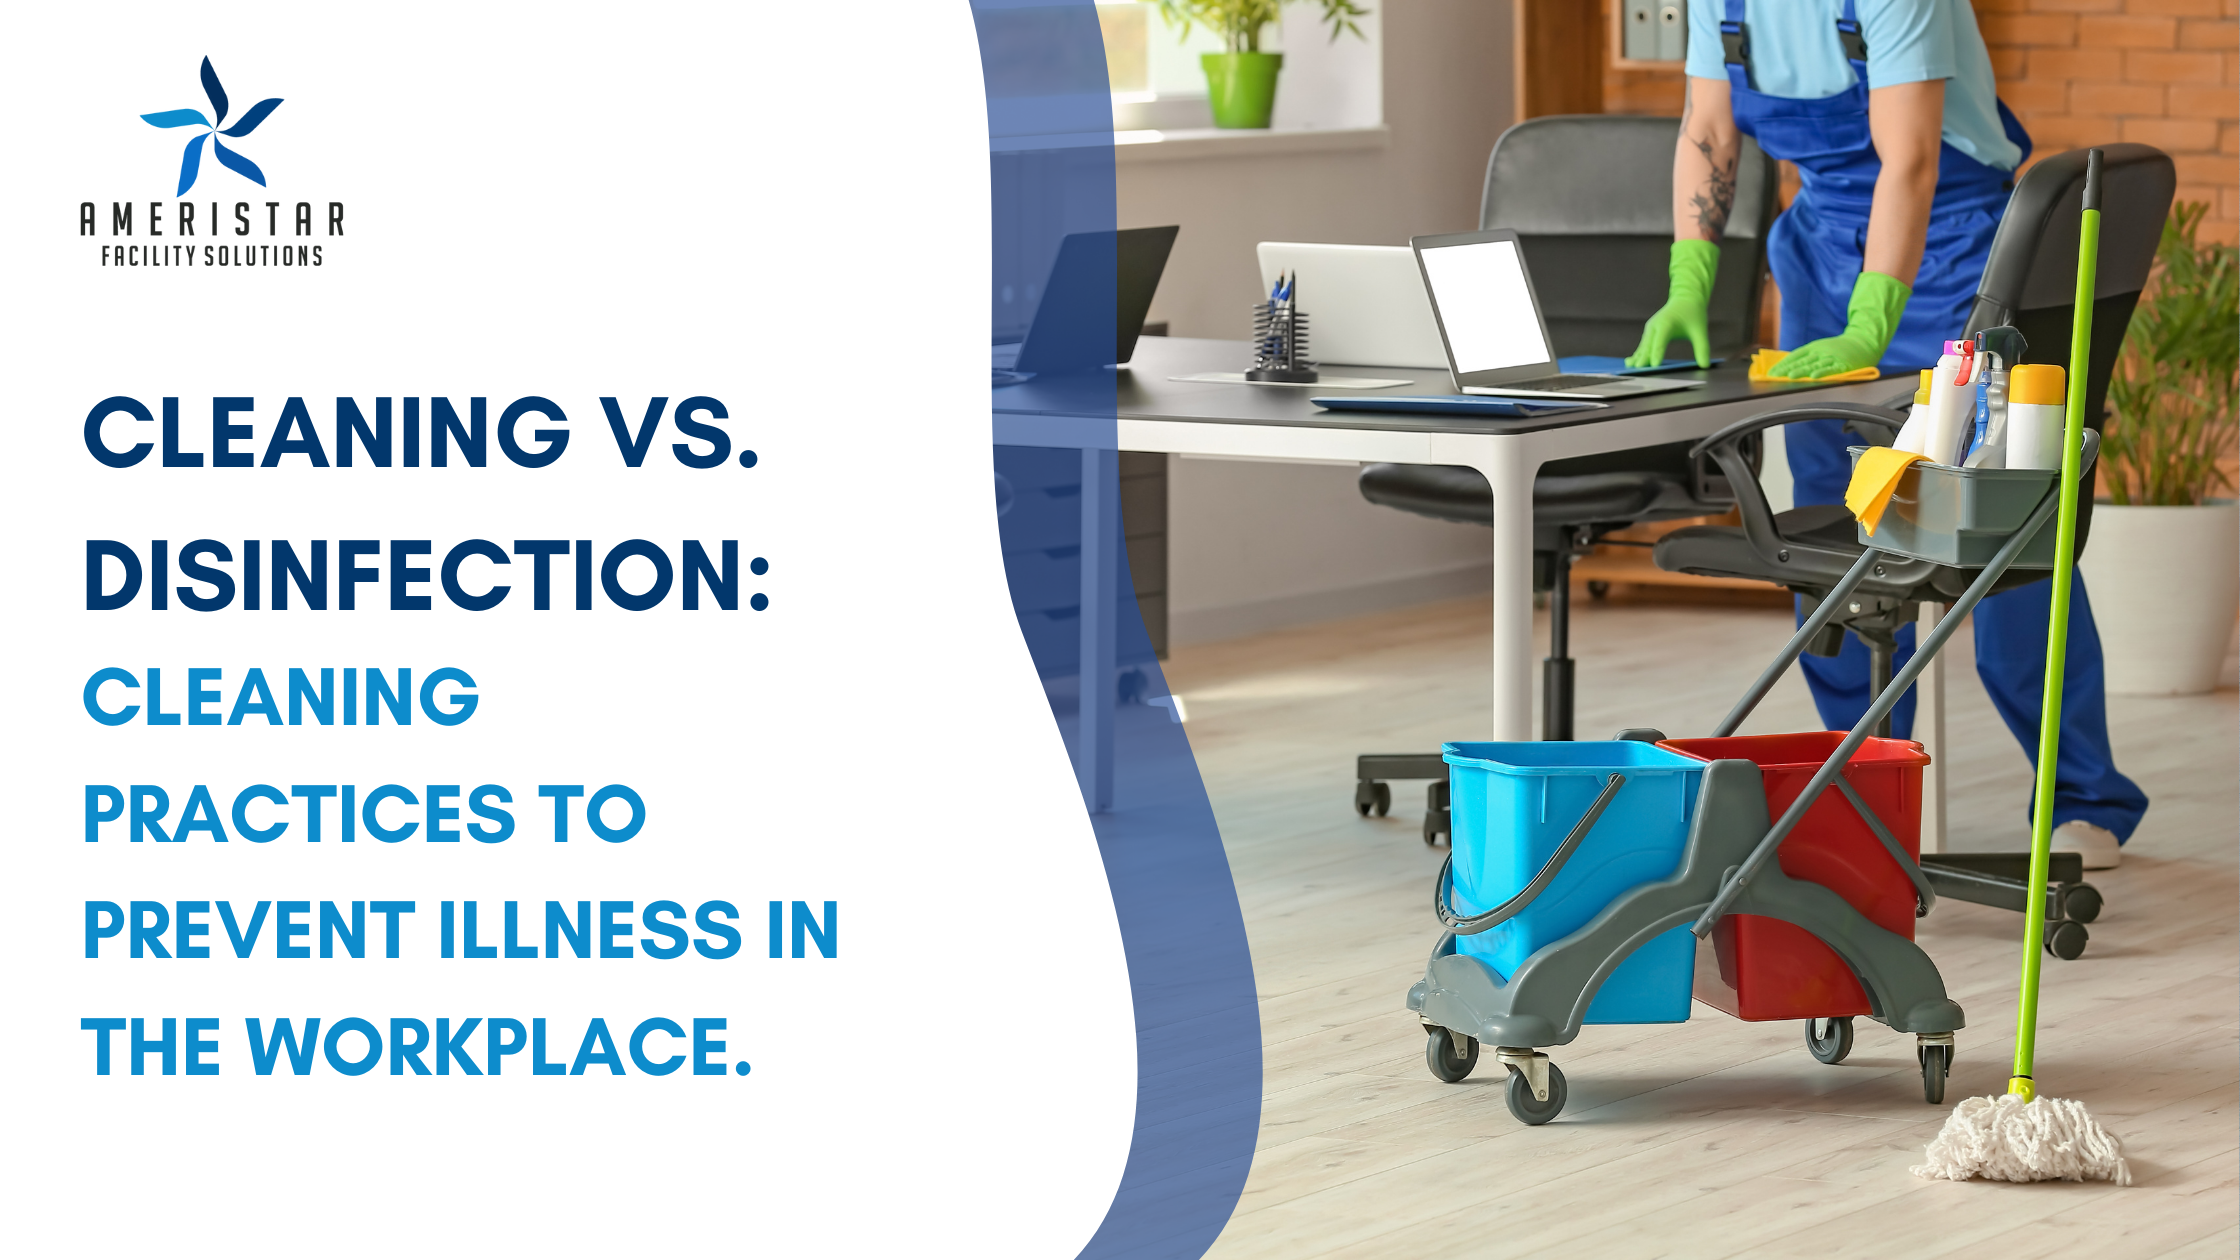 Enhancing Workplace Health, The Power of Janitorial Cleaning and Disinfection